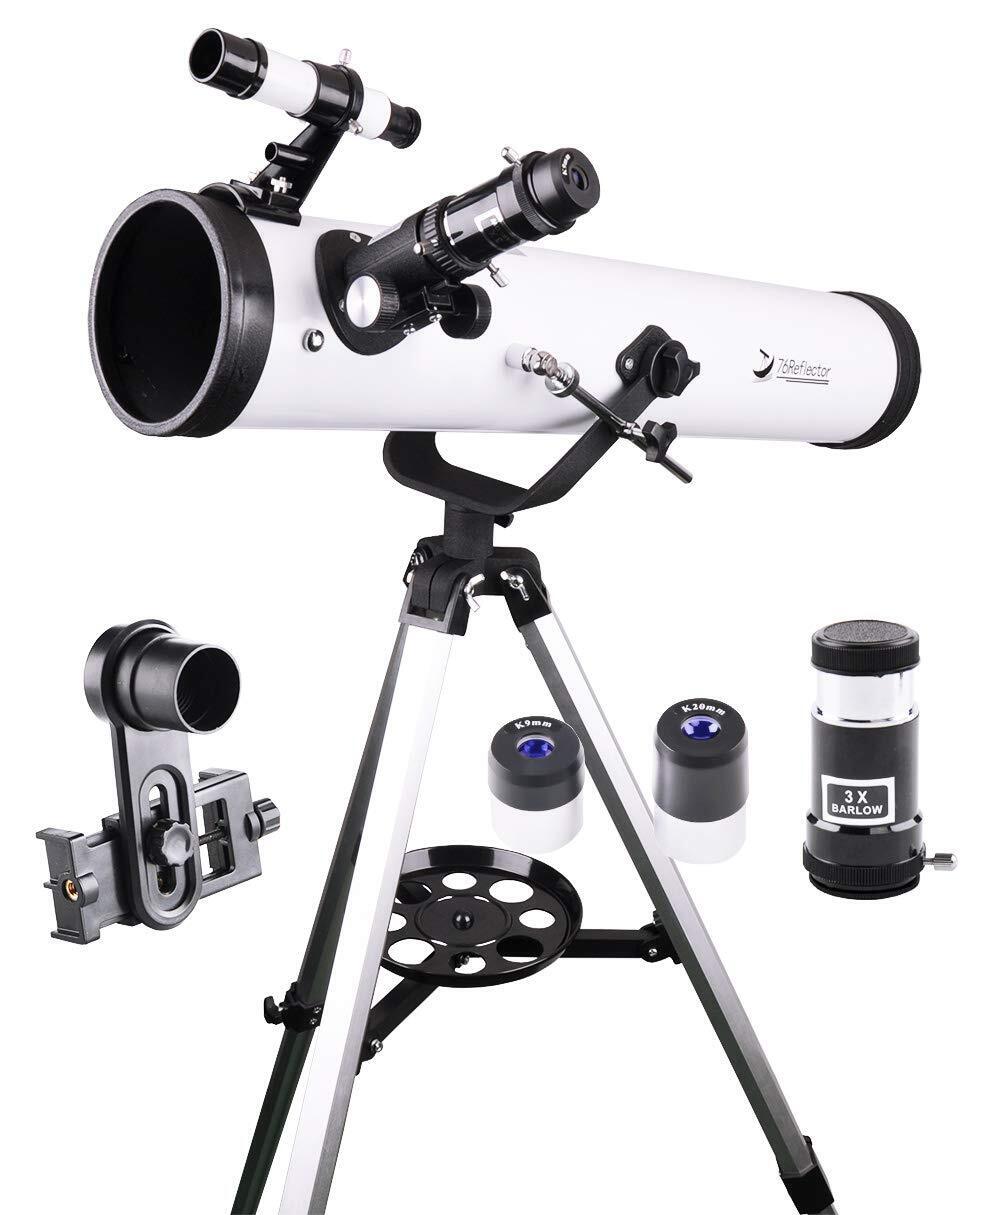 76mm Reflector Astronomy Telescope with Tripod and 10mm Eyepiece Phone Holder